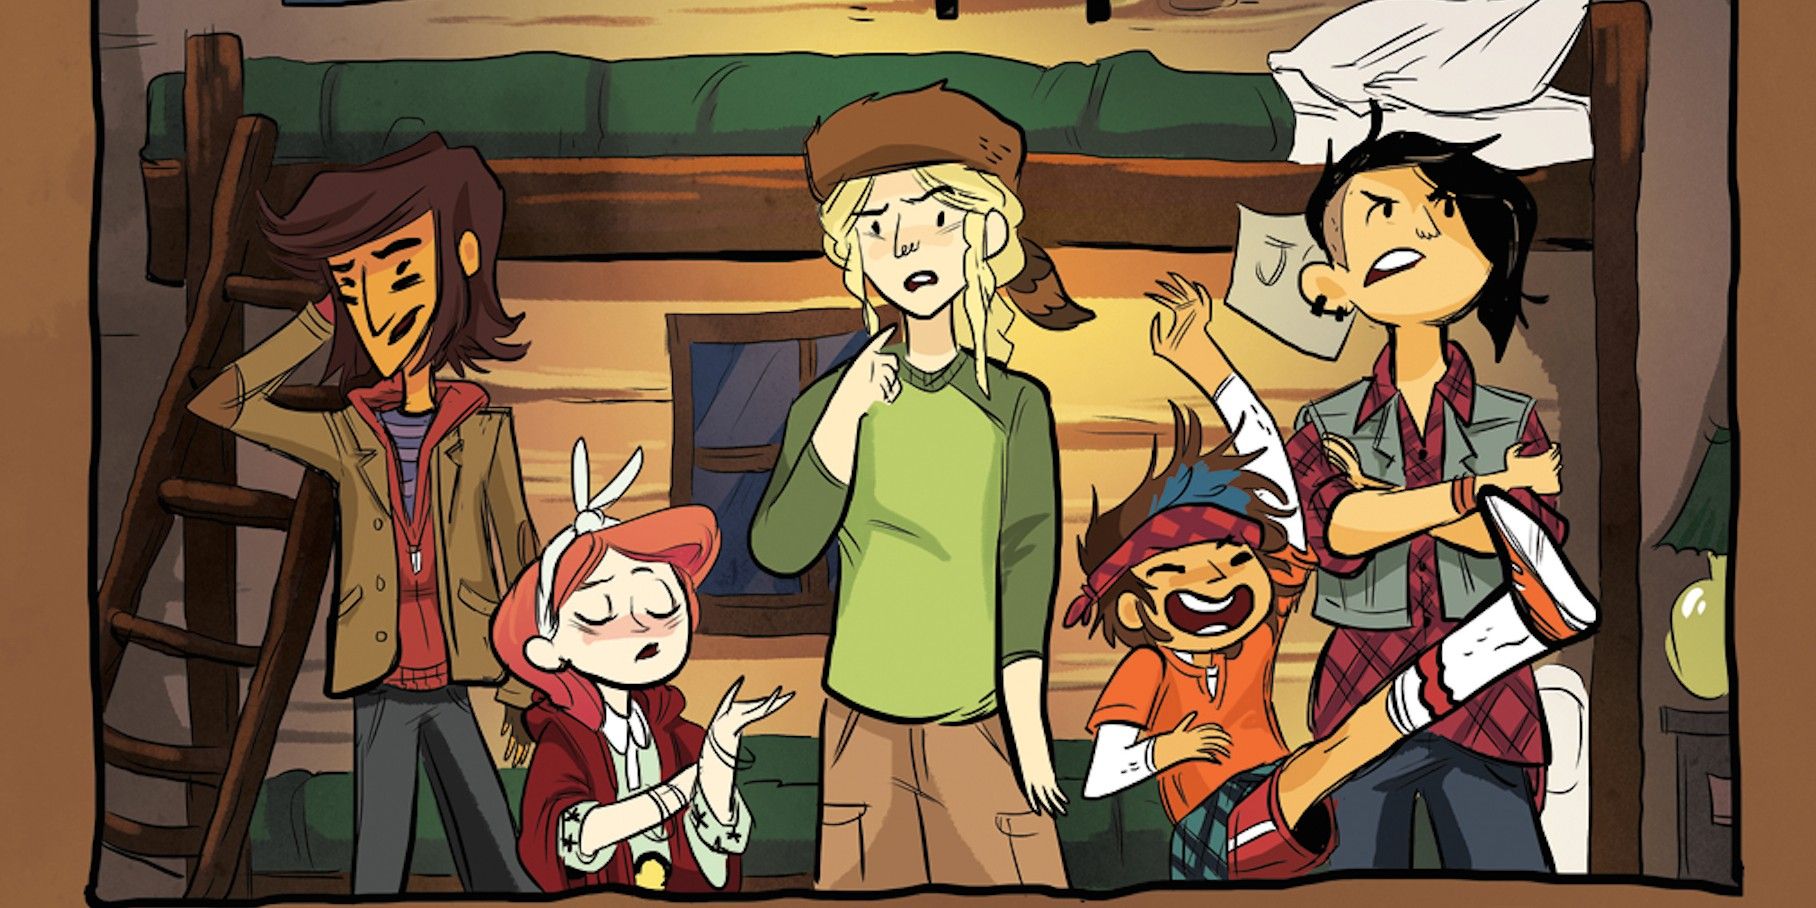 A group of the main characters from Lumberjanes